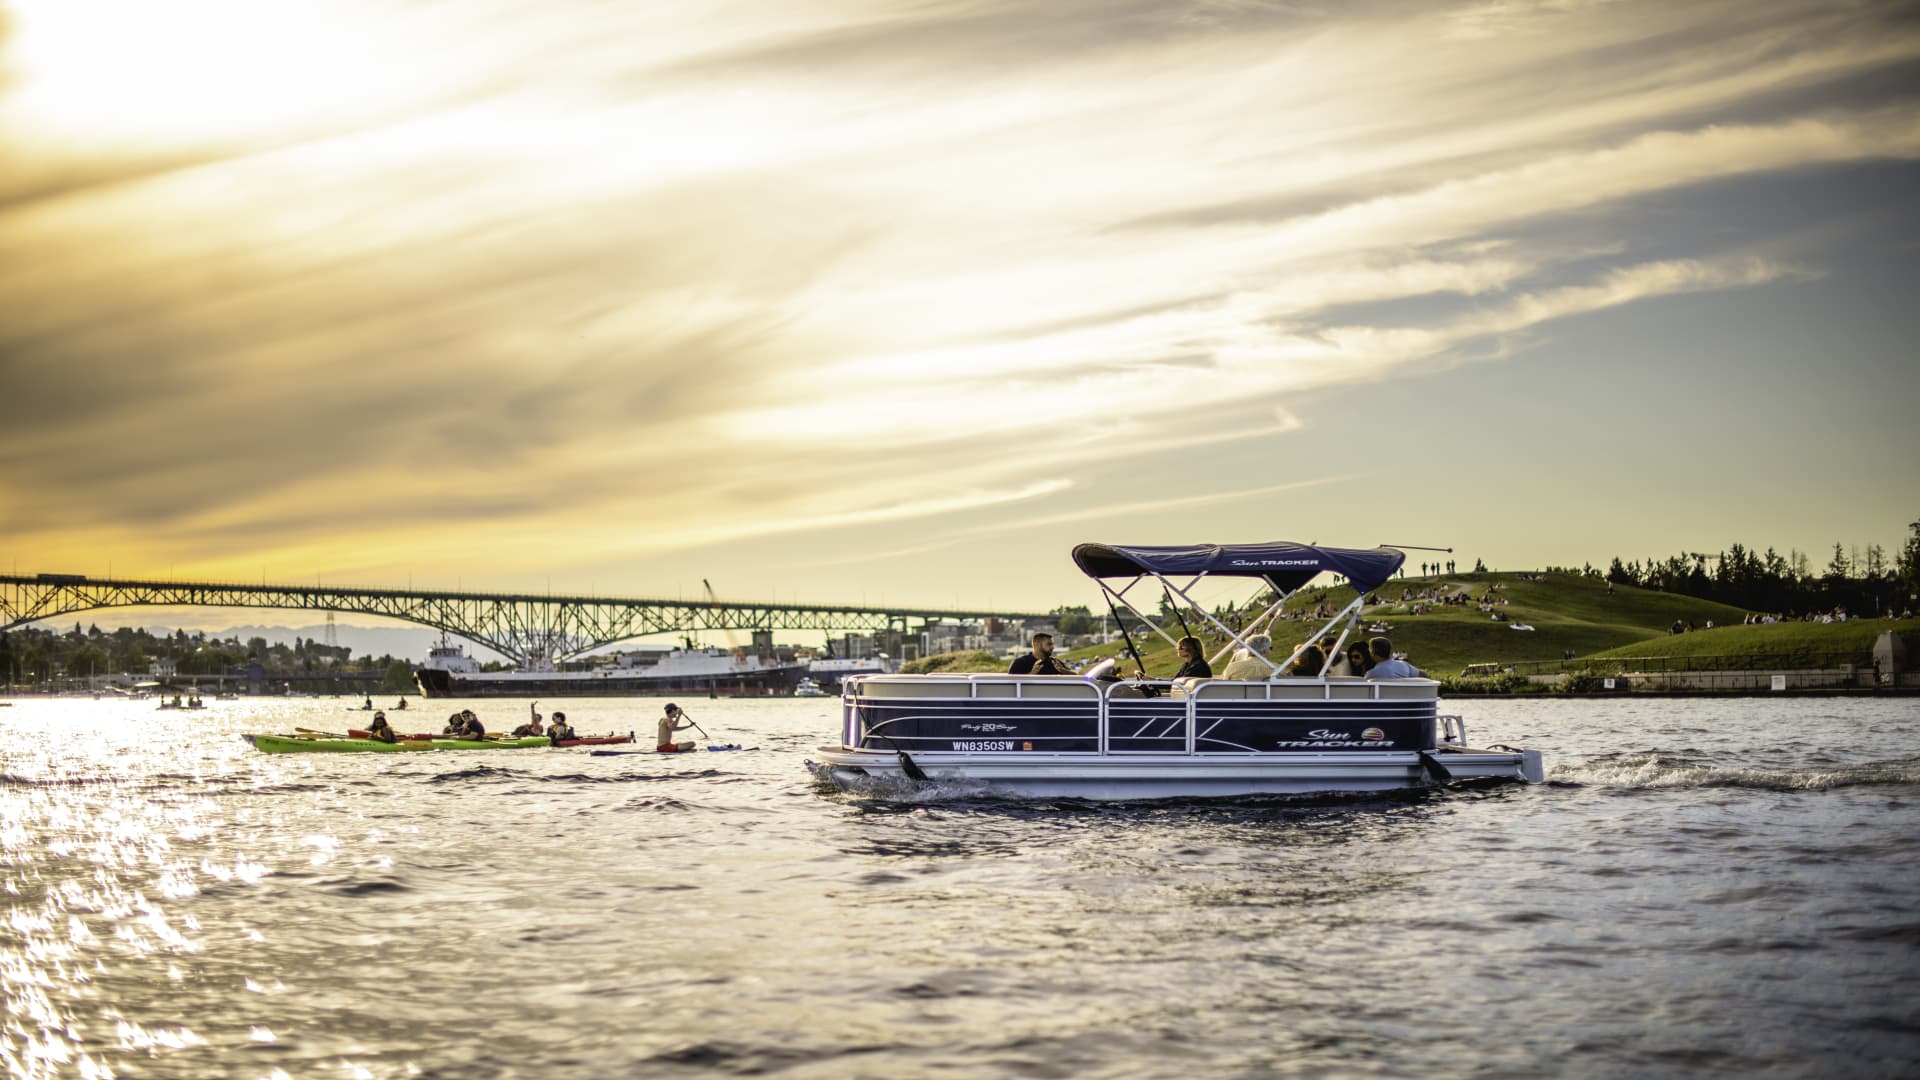 This pontoon is powered by a Pure Watercraft fully electric outboard motor.